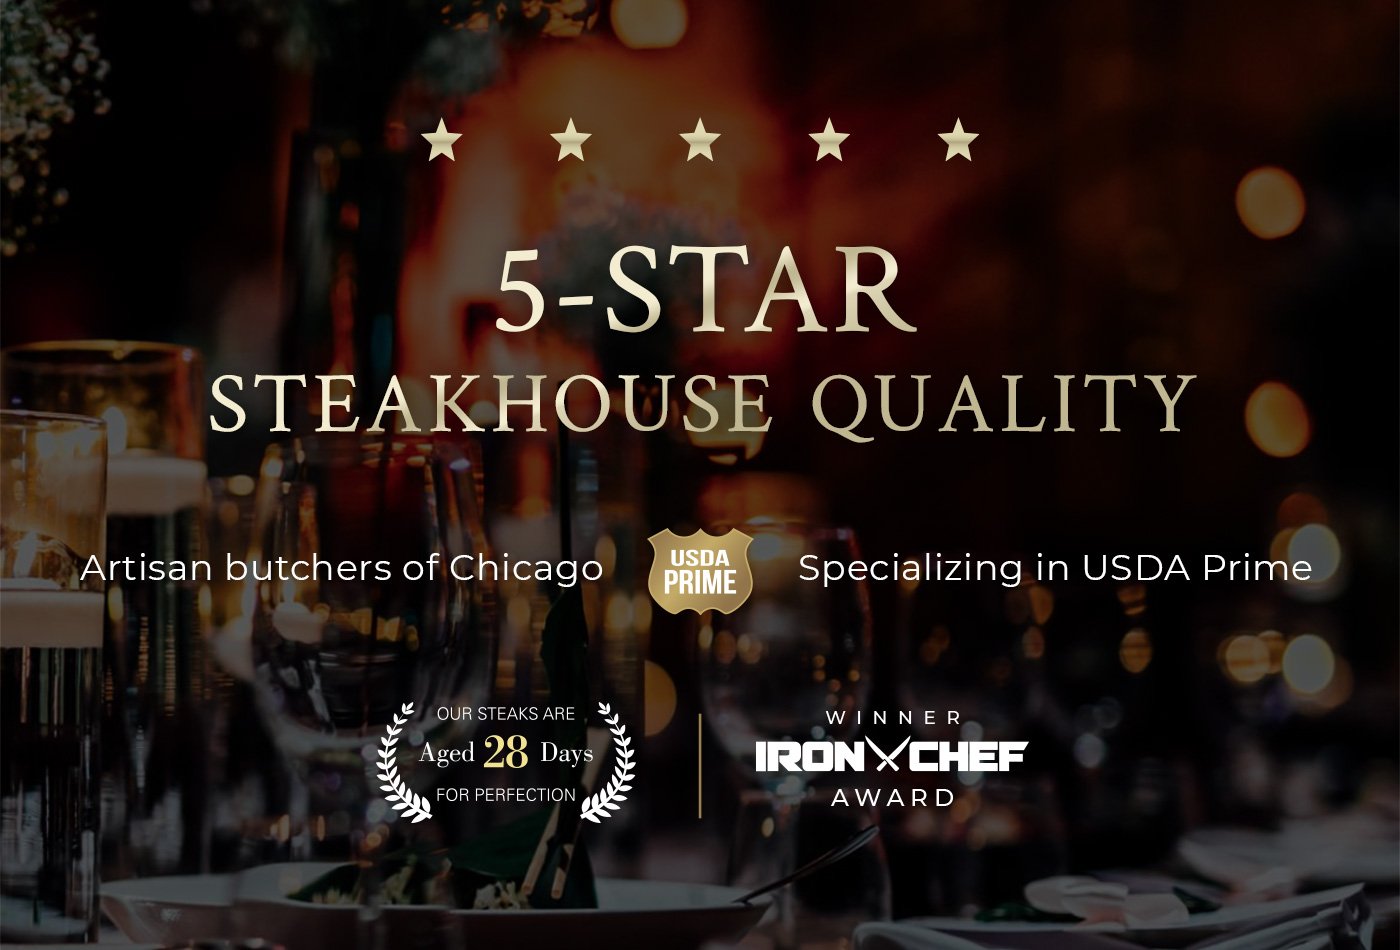 5-Star Steakhouse Quality | Artisan butchers of Chicago Specializing in USDA Prime